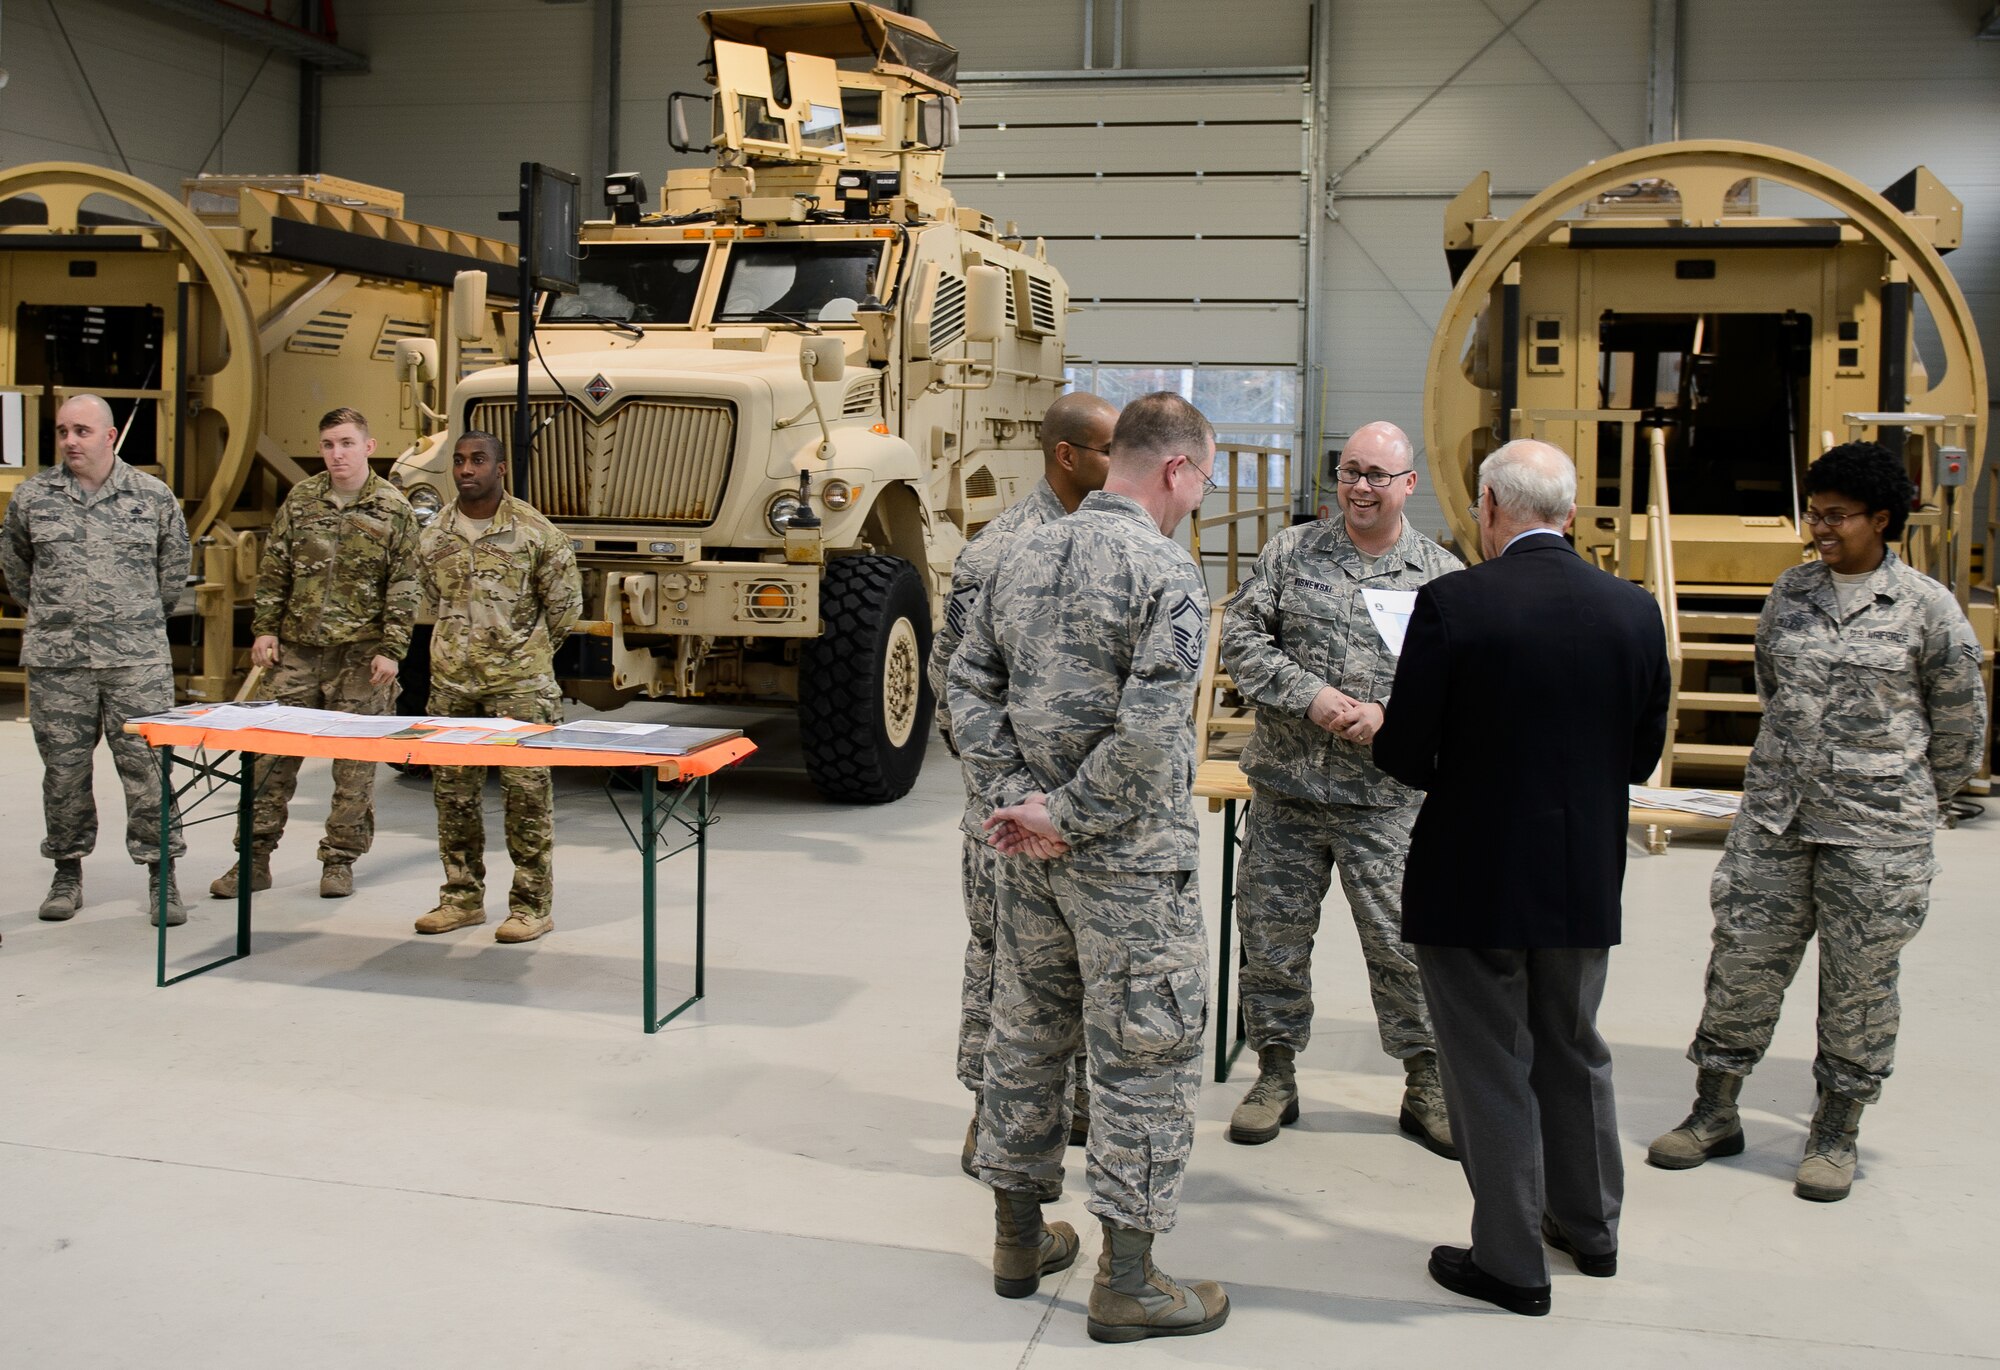 Airmen from the 7th Weather Squadron explain their mission and capabilities to Sam E. Parish, retired Chief Master Sergeant of the Air Force, Jan. 26, 2016 at Ramstein Air Base, Germany. During Parish’s visit in Germany he visited the 435th Air Ground Operations Wing to learn about their capabilities and accomplishments. (U.S. Air Force photo/Staff Sgt. Armando A. Schwier-Morales)